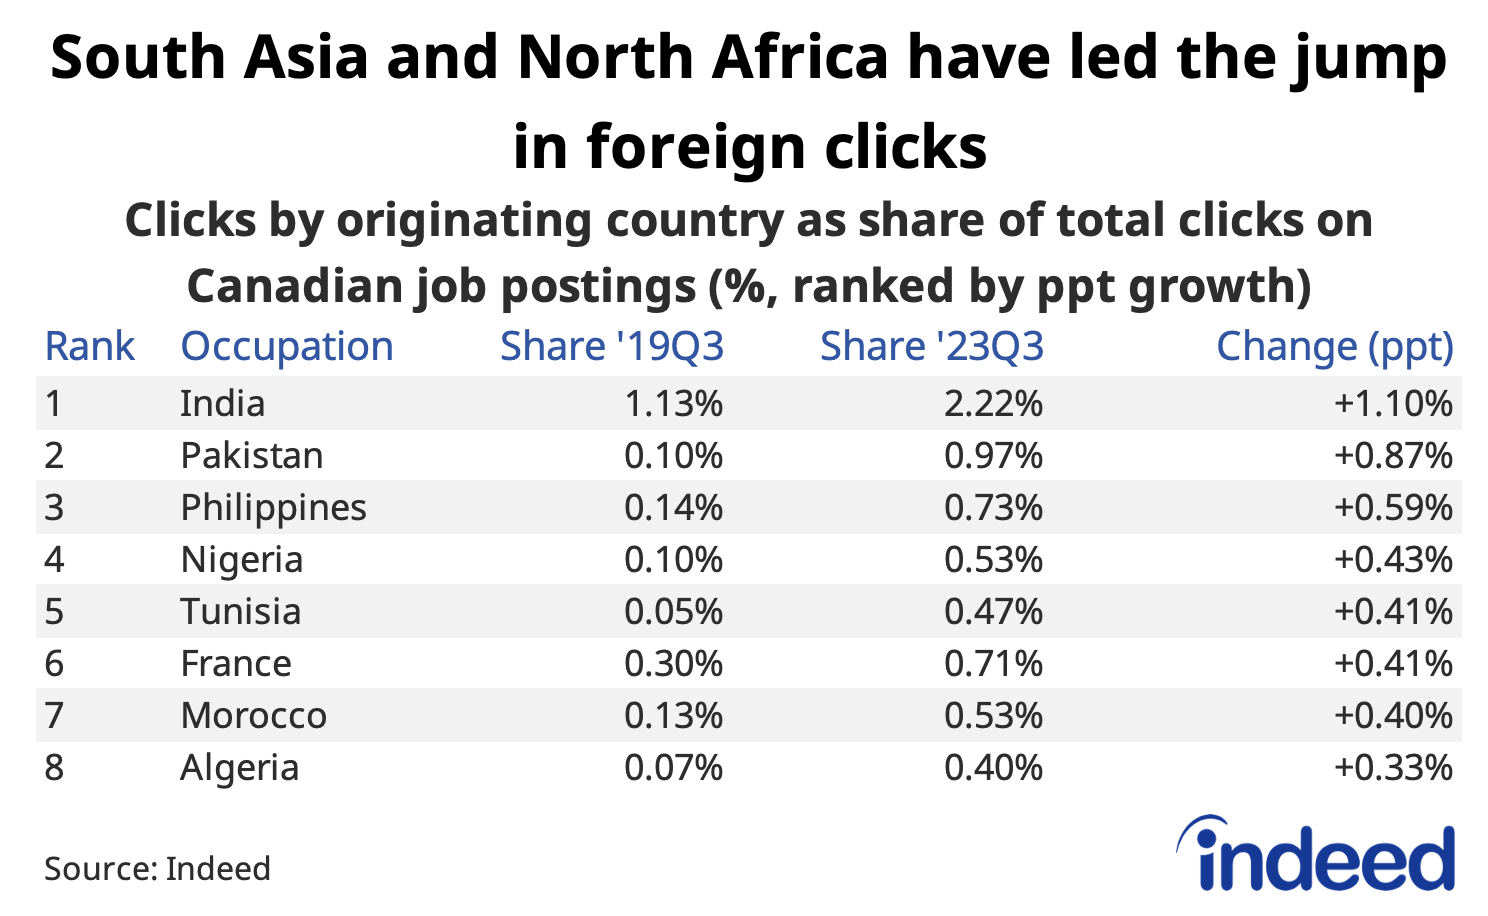 Table titled “South Asia and North Africa have led the jump in foreign clicks,” shows the foreign click share on Canadian job postings by originating country as a share of total Canadian clicks in 2019Q3 and 2023Q3, as well as the change in percentage points. Job seekers from India contributed most to the rise in foreign click share, but the share grew even faster among other countries like Pakistan, the Philippines, Nigeria, and several countries in North Africa. 